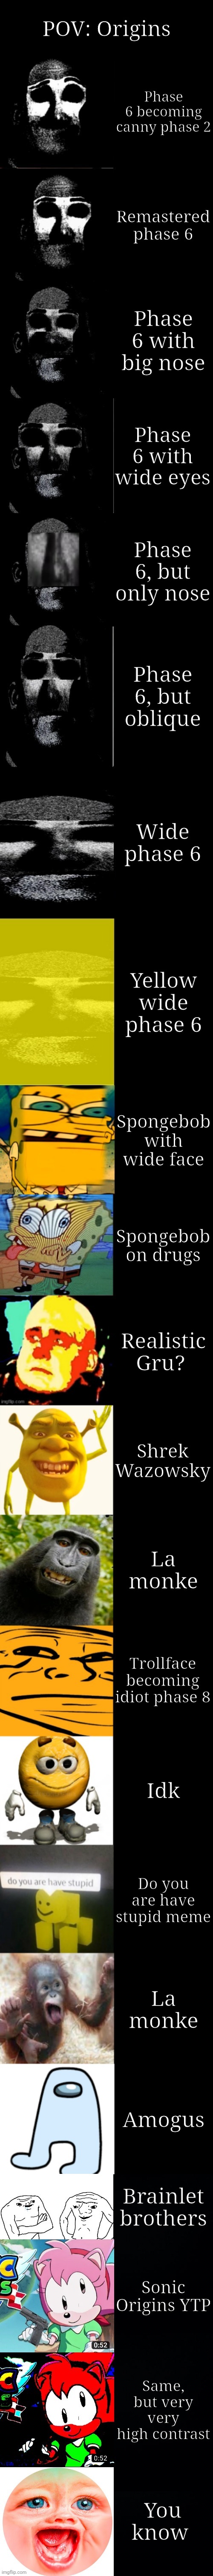 Origins of Me becoming idiot extended | POV: Origins; Phase 6 becoming canny phase 2; Remastered phase 6; Phase 6 with big nose; Phase 6 with wide eyes; Phase 6, but only nose; Phase 6, but oblique; Wide phase 6; Yellow wide phase 6; Spongebob with wide face; Spongebob on drugs; Realistic Gru? Shrek Wazowsky; La monke; Trollface becoming idiot phase 8; Idk; Do you are have stupid meme; La monke; Amogus; Brainlet brothers; Sonic Origins YTP; Same, but very very high contrast; You know | image tagged in funtime foxy the imgflip fox becoming idiot 22 phases | made w/ Imgflip meme maker